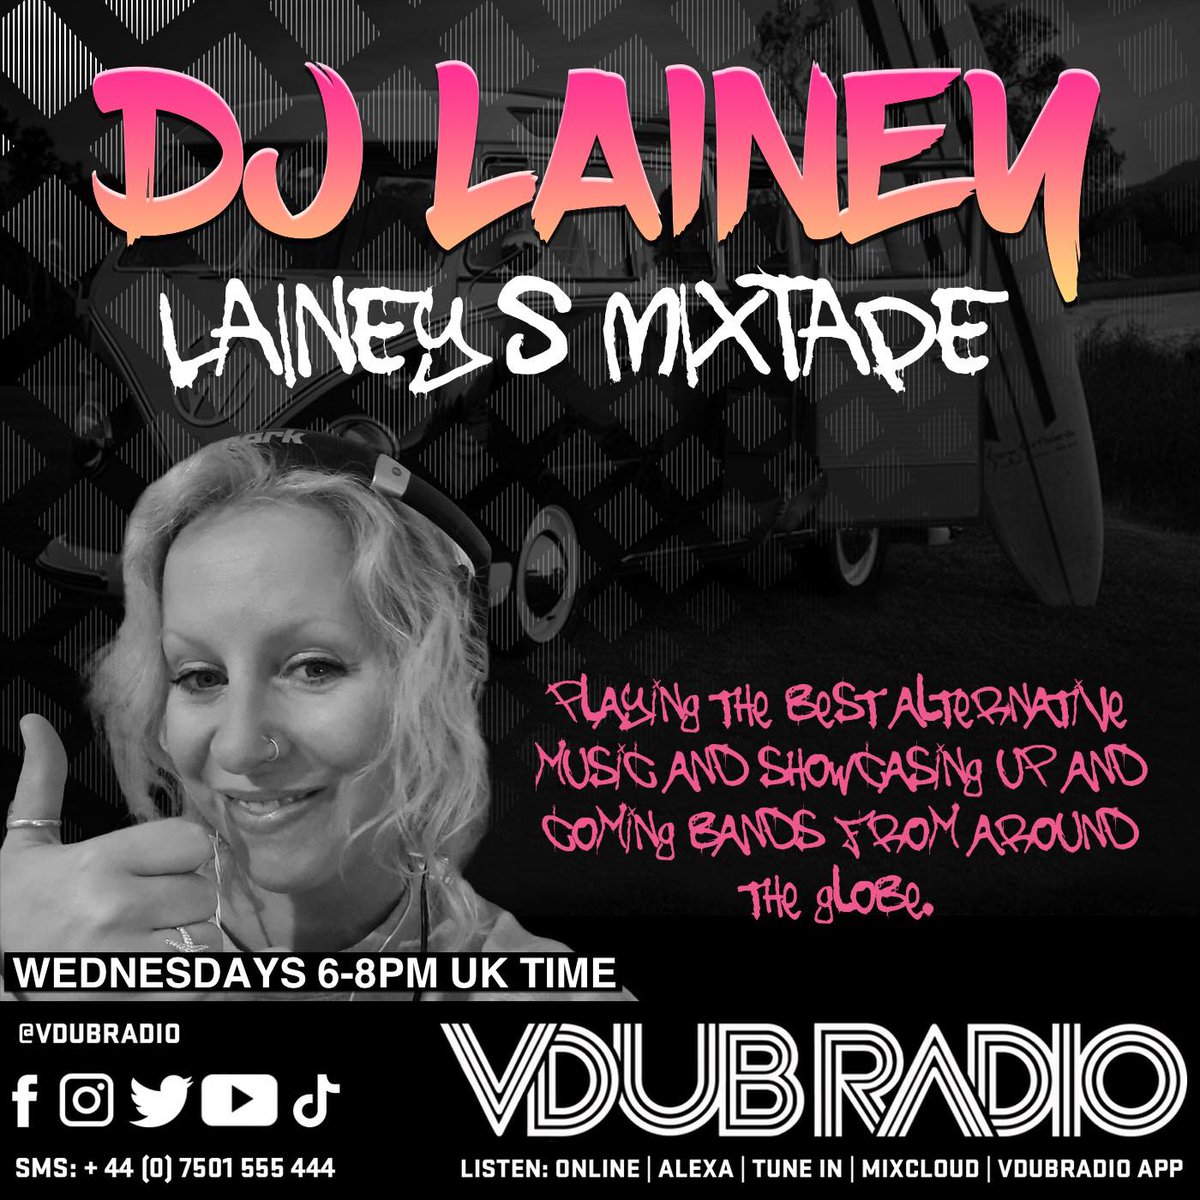 This Wednesday @VDubRadio me for 2 hrs from 6pm for the showcase PT1

Featuring #AngelsOfLibra & @NDHJohnston @side4collective Loren @wezkingmusic @TheSilverLineUK @DylonJack @foldfm @TheKairos1 Creola @lewca @thebandsoup 

What a mix of tunes for 2 hours of your ears pleasure